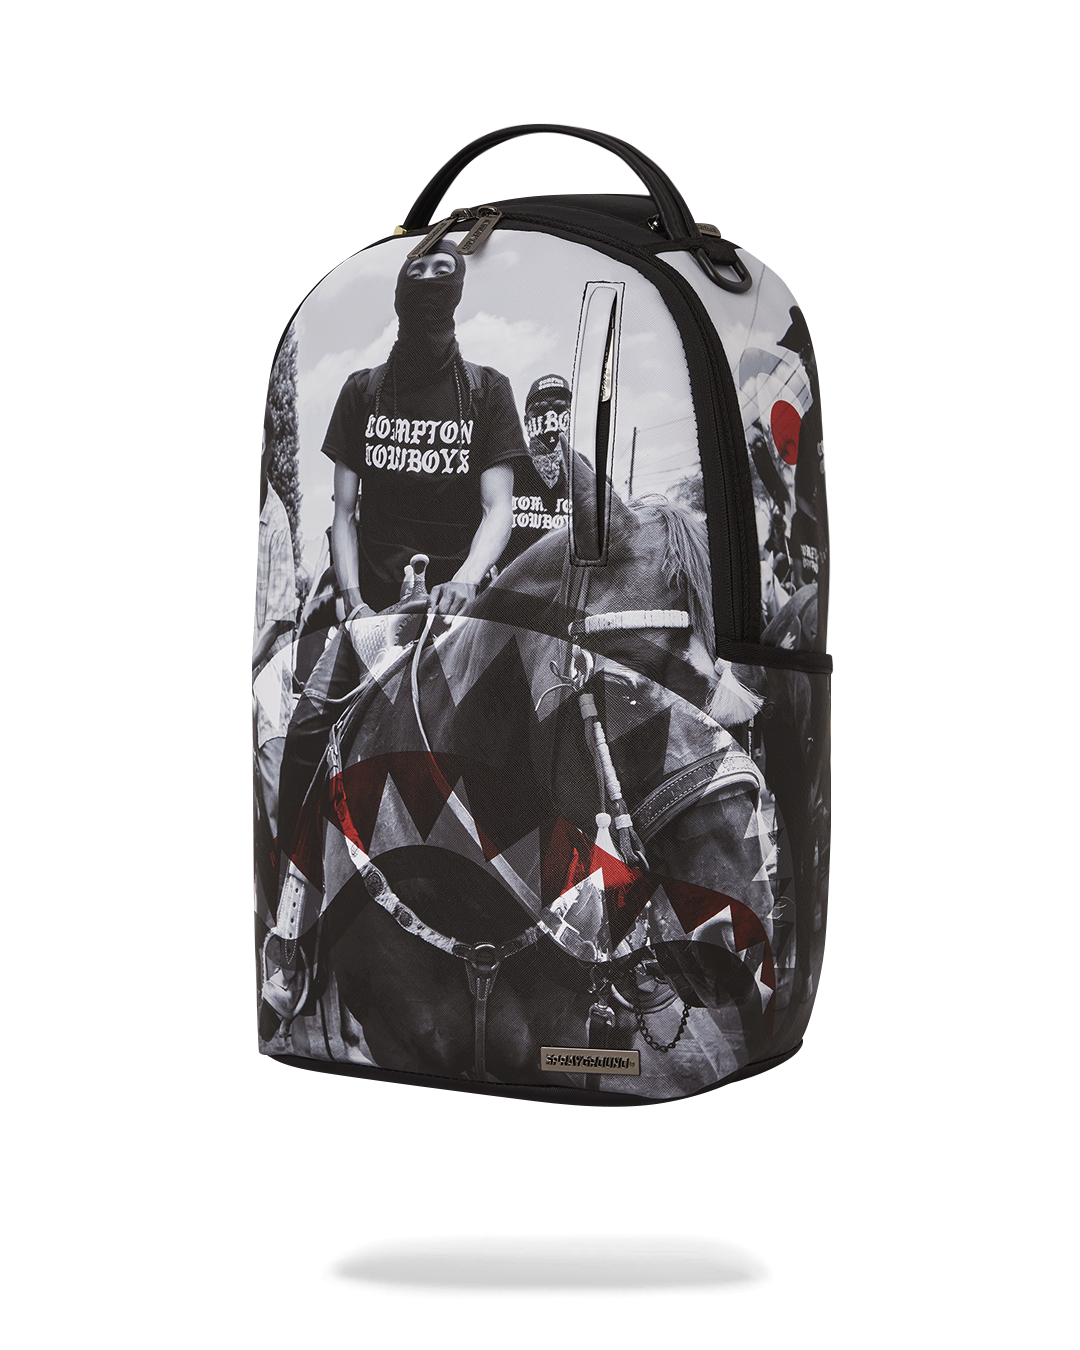 COMPTON COWBOYS RIDE ALONE BACKPACK